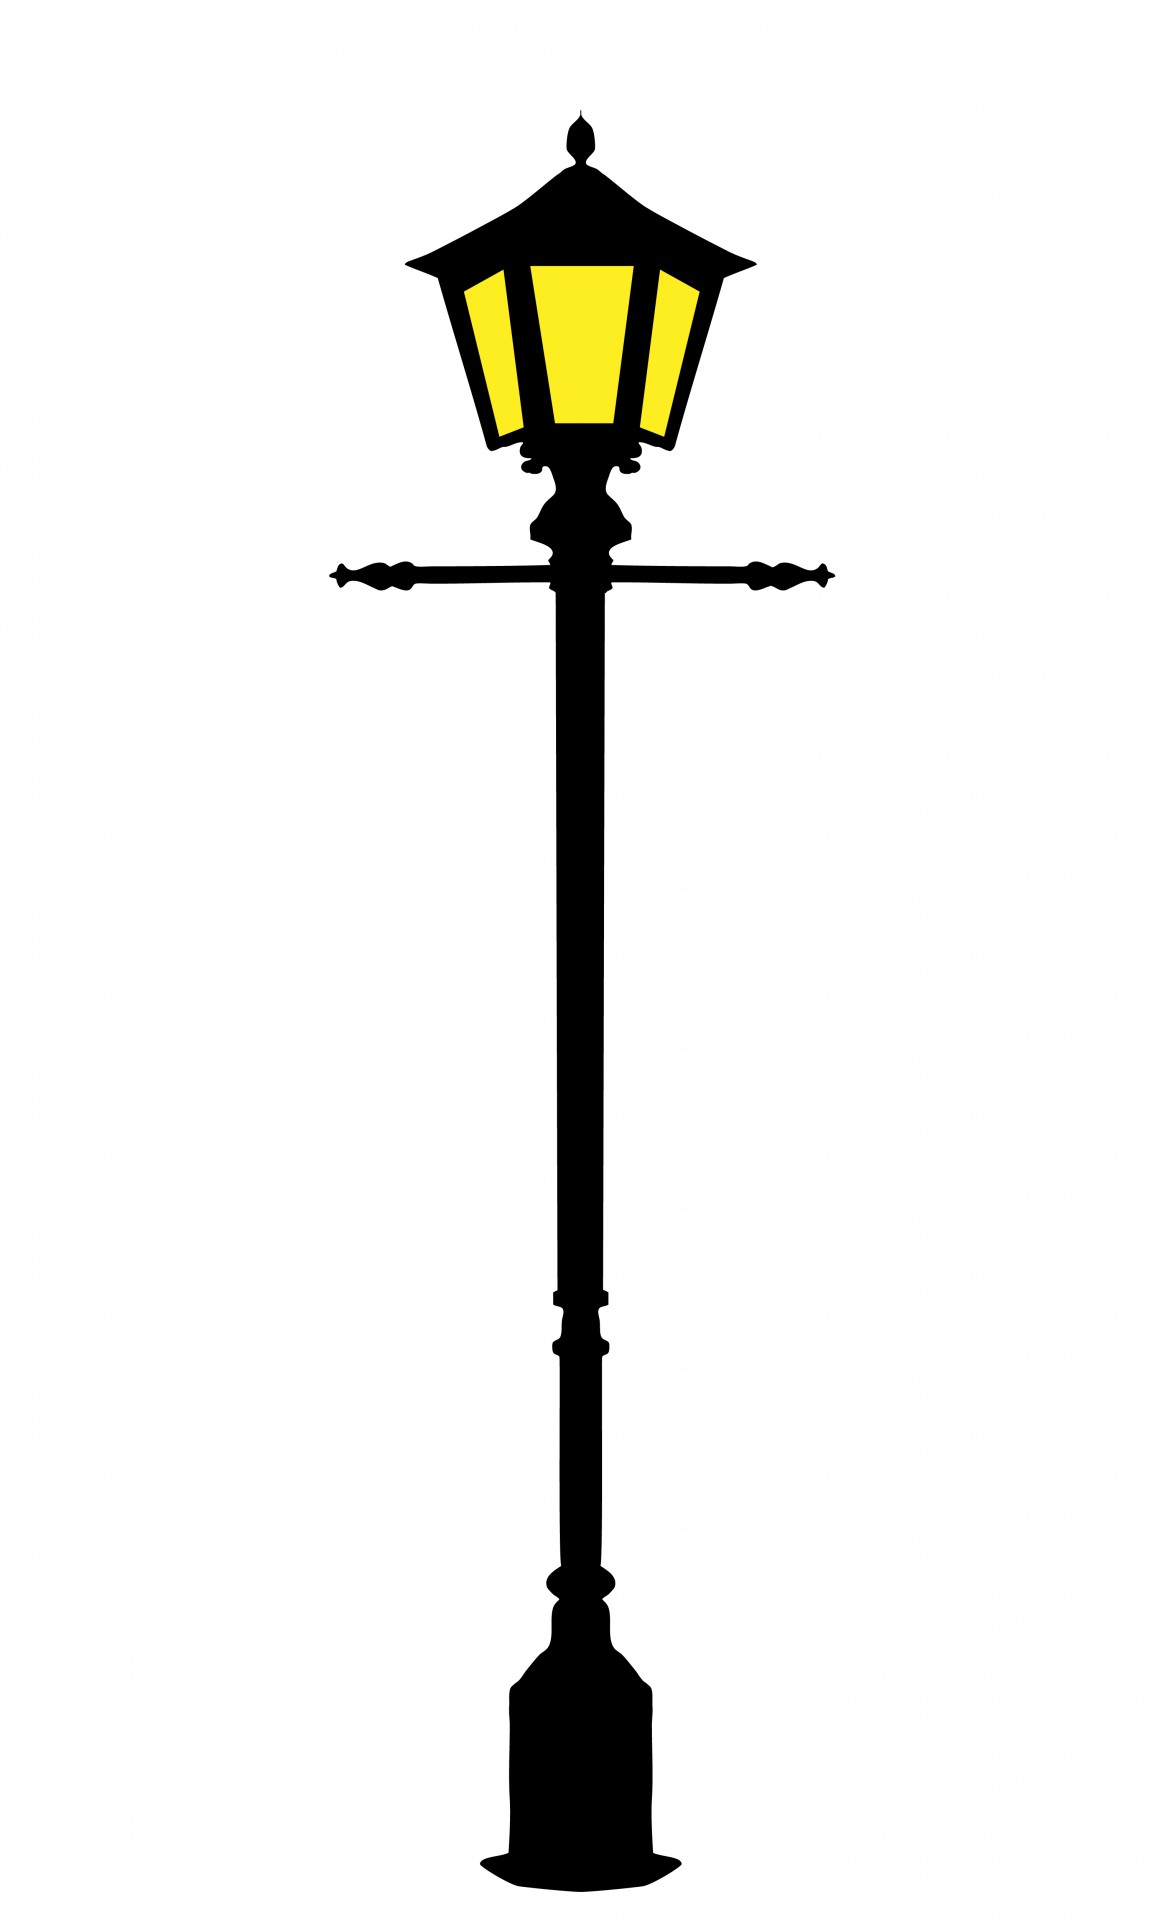 Lamp post silhouette clipart